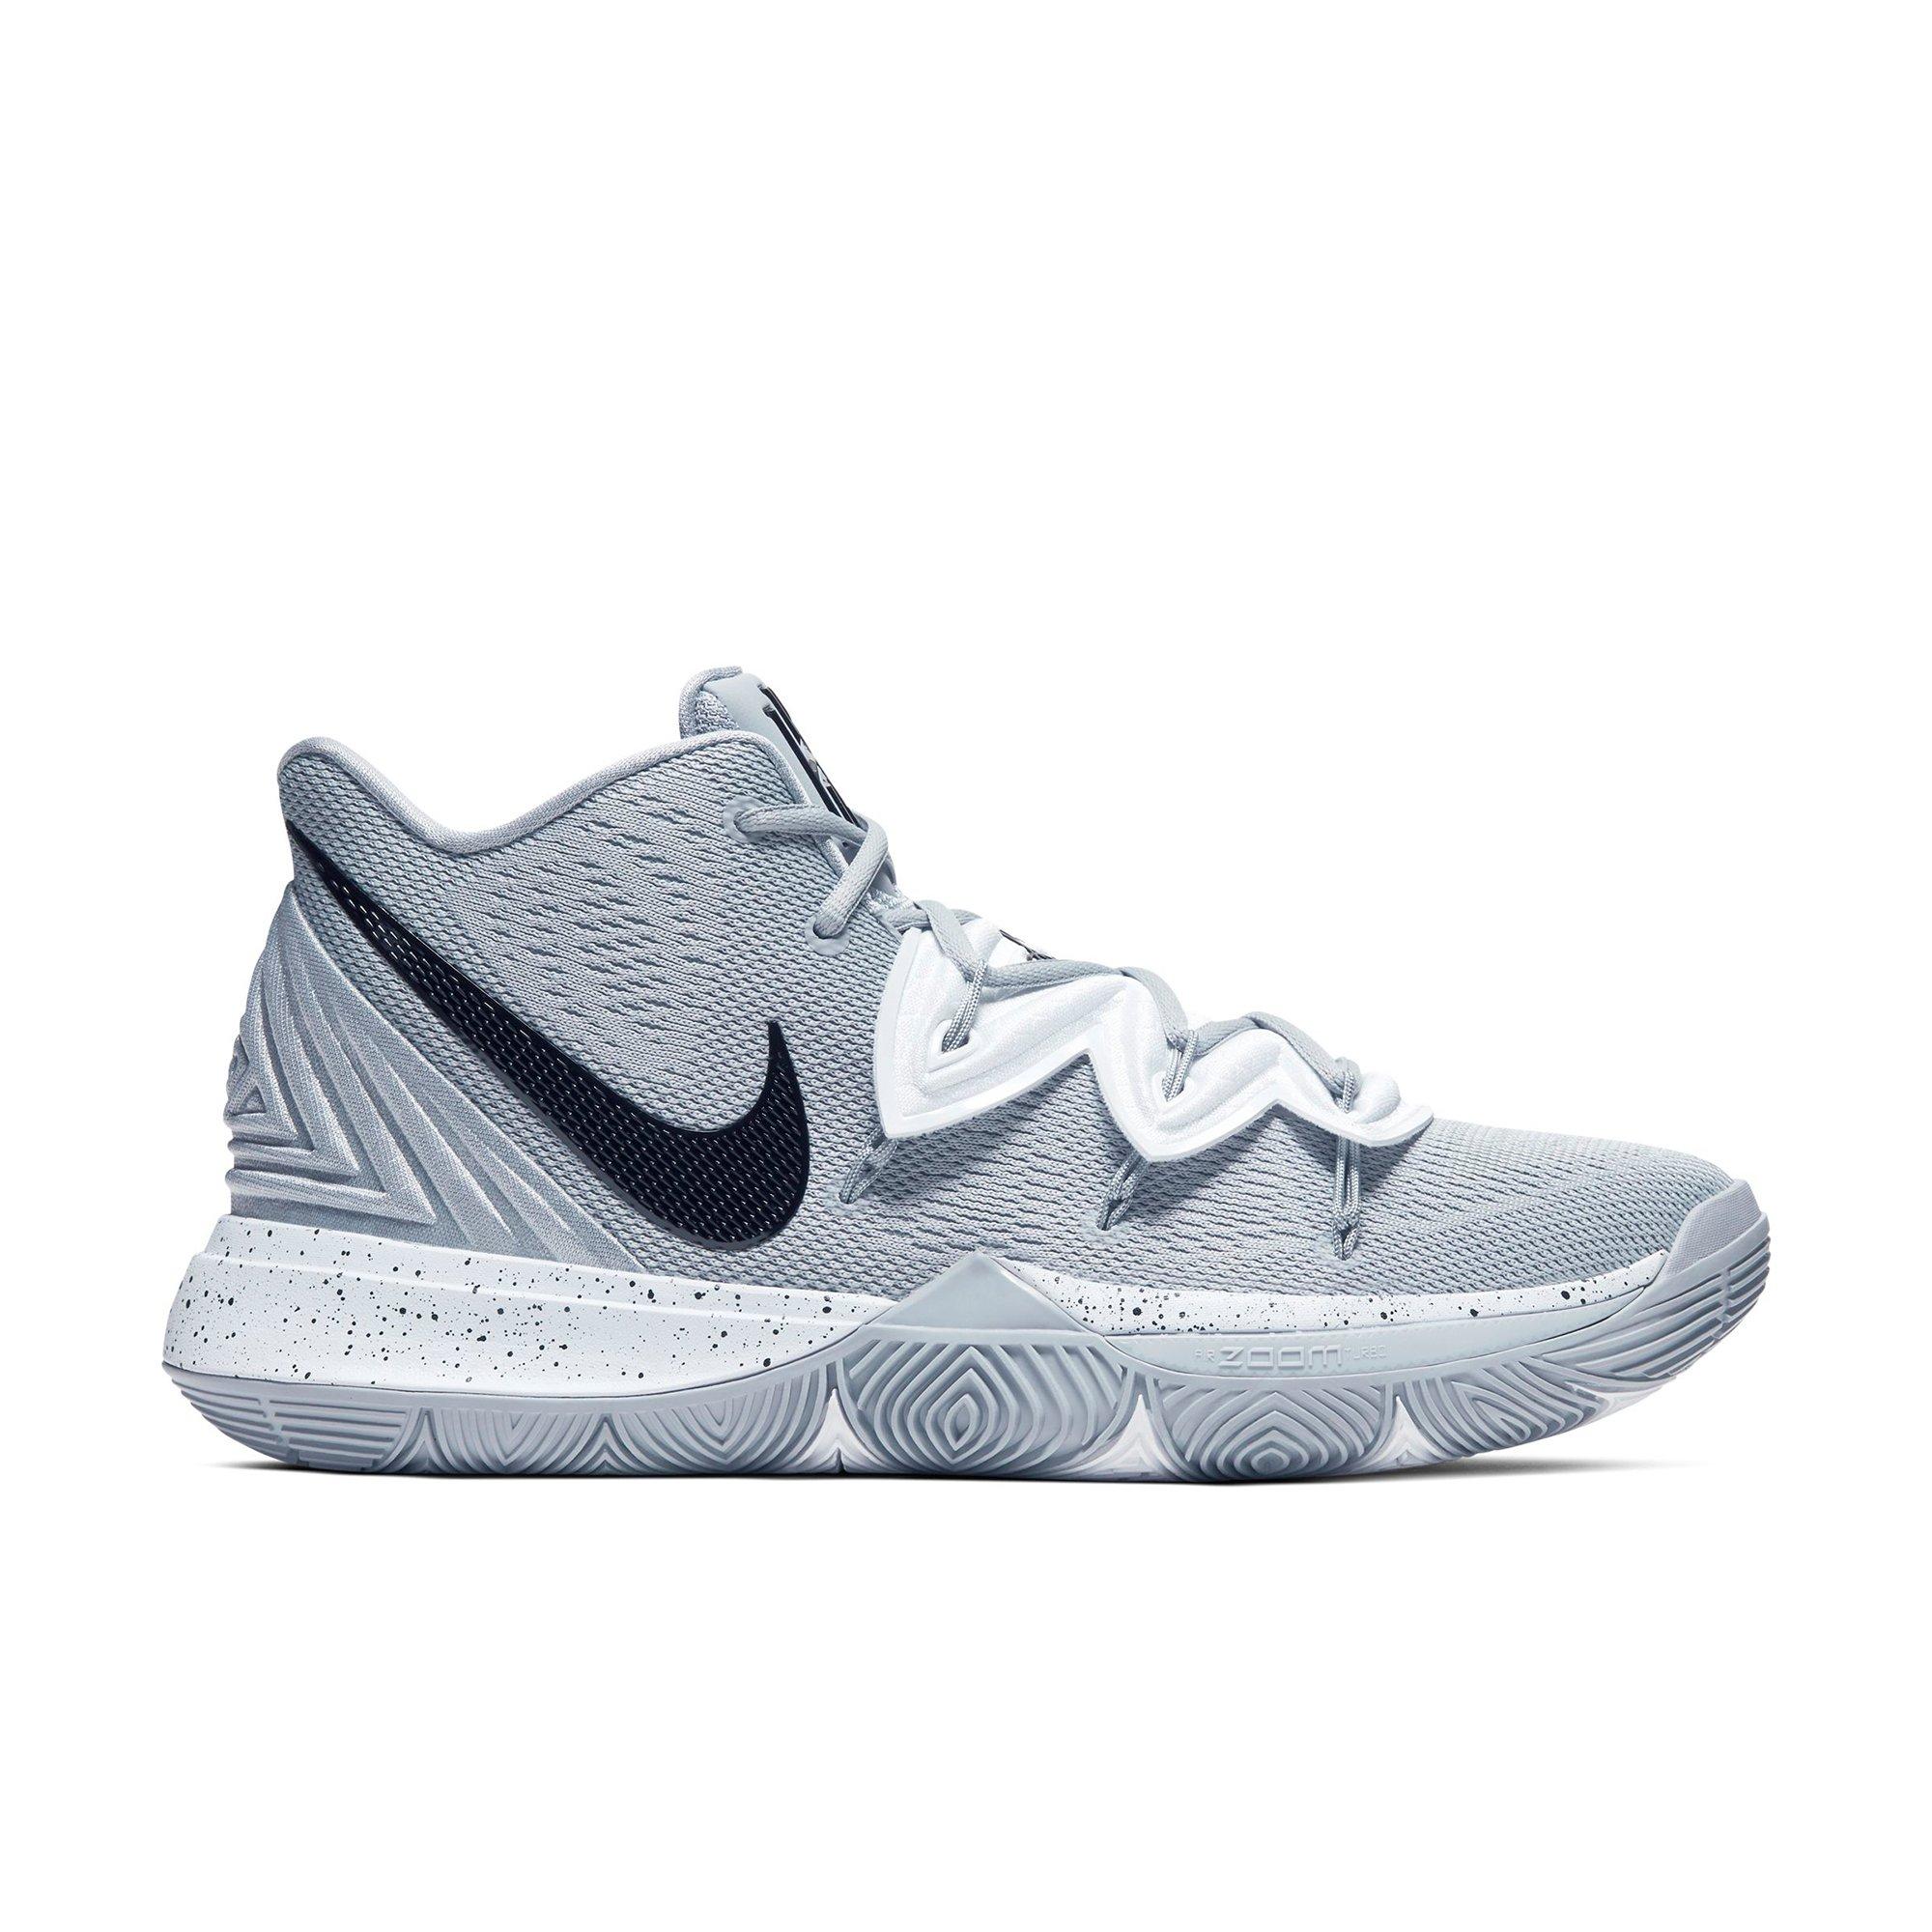 kyrie 5 shoes mens